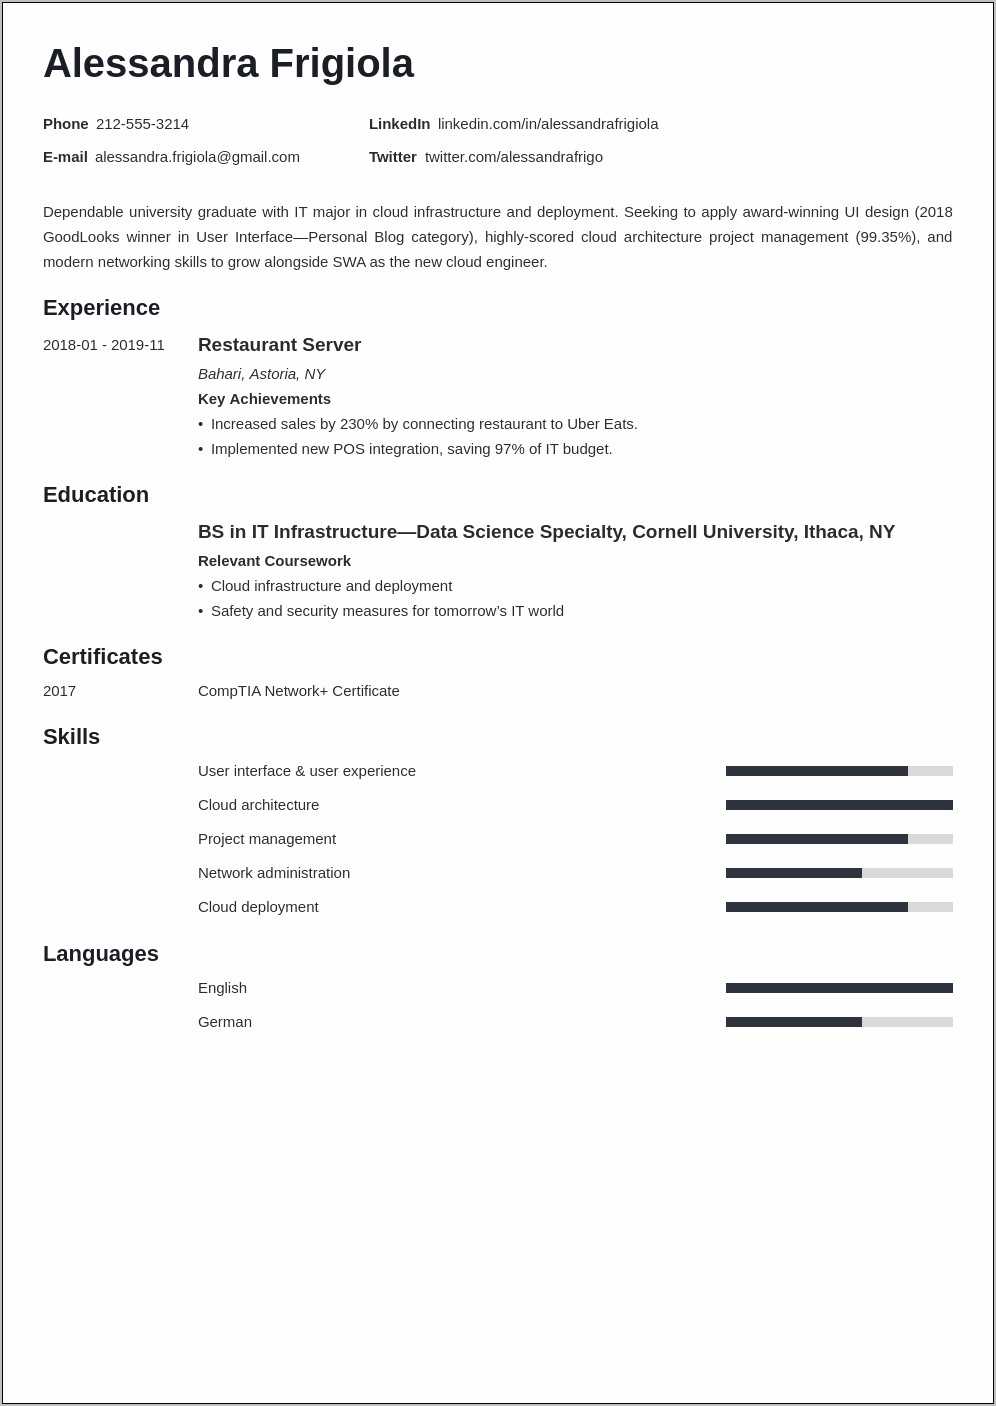 resume-format-for-entry-level-jobs-resume-example-gallery